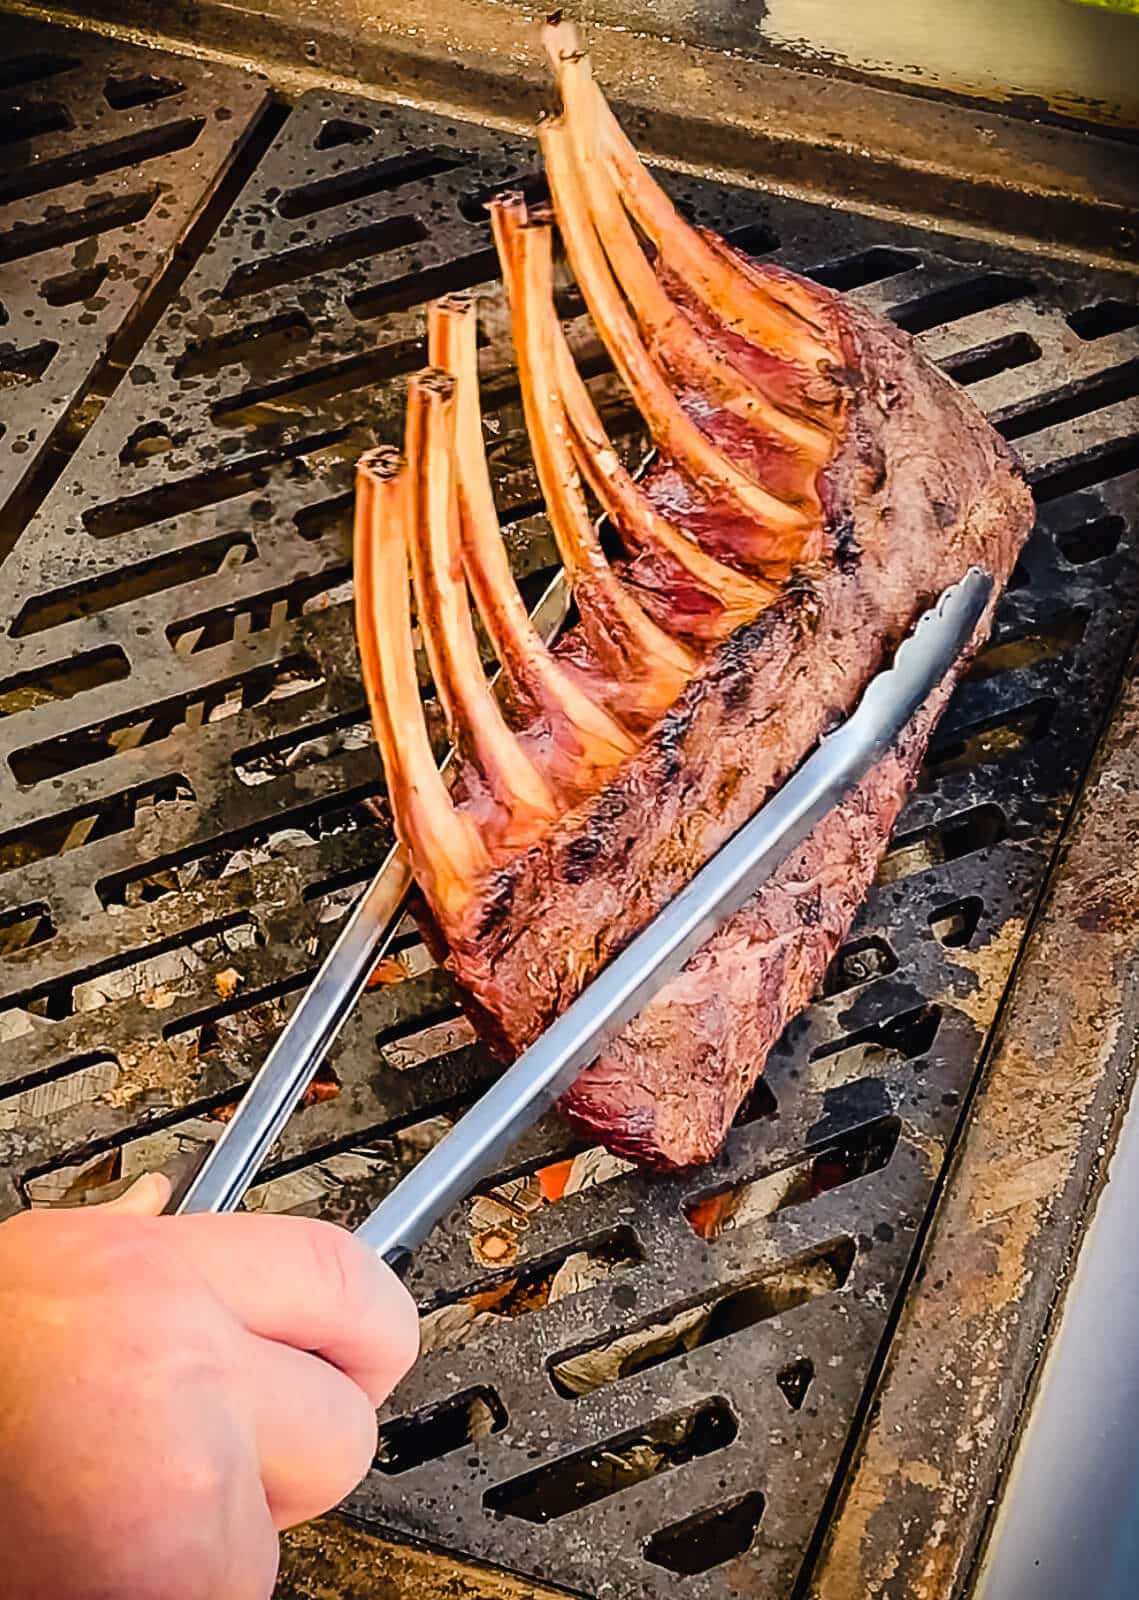 venison being flipped on a grill